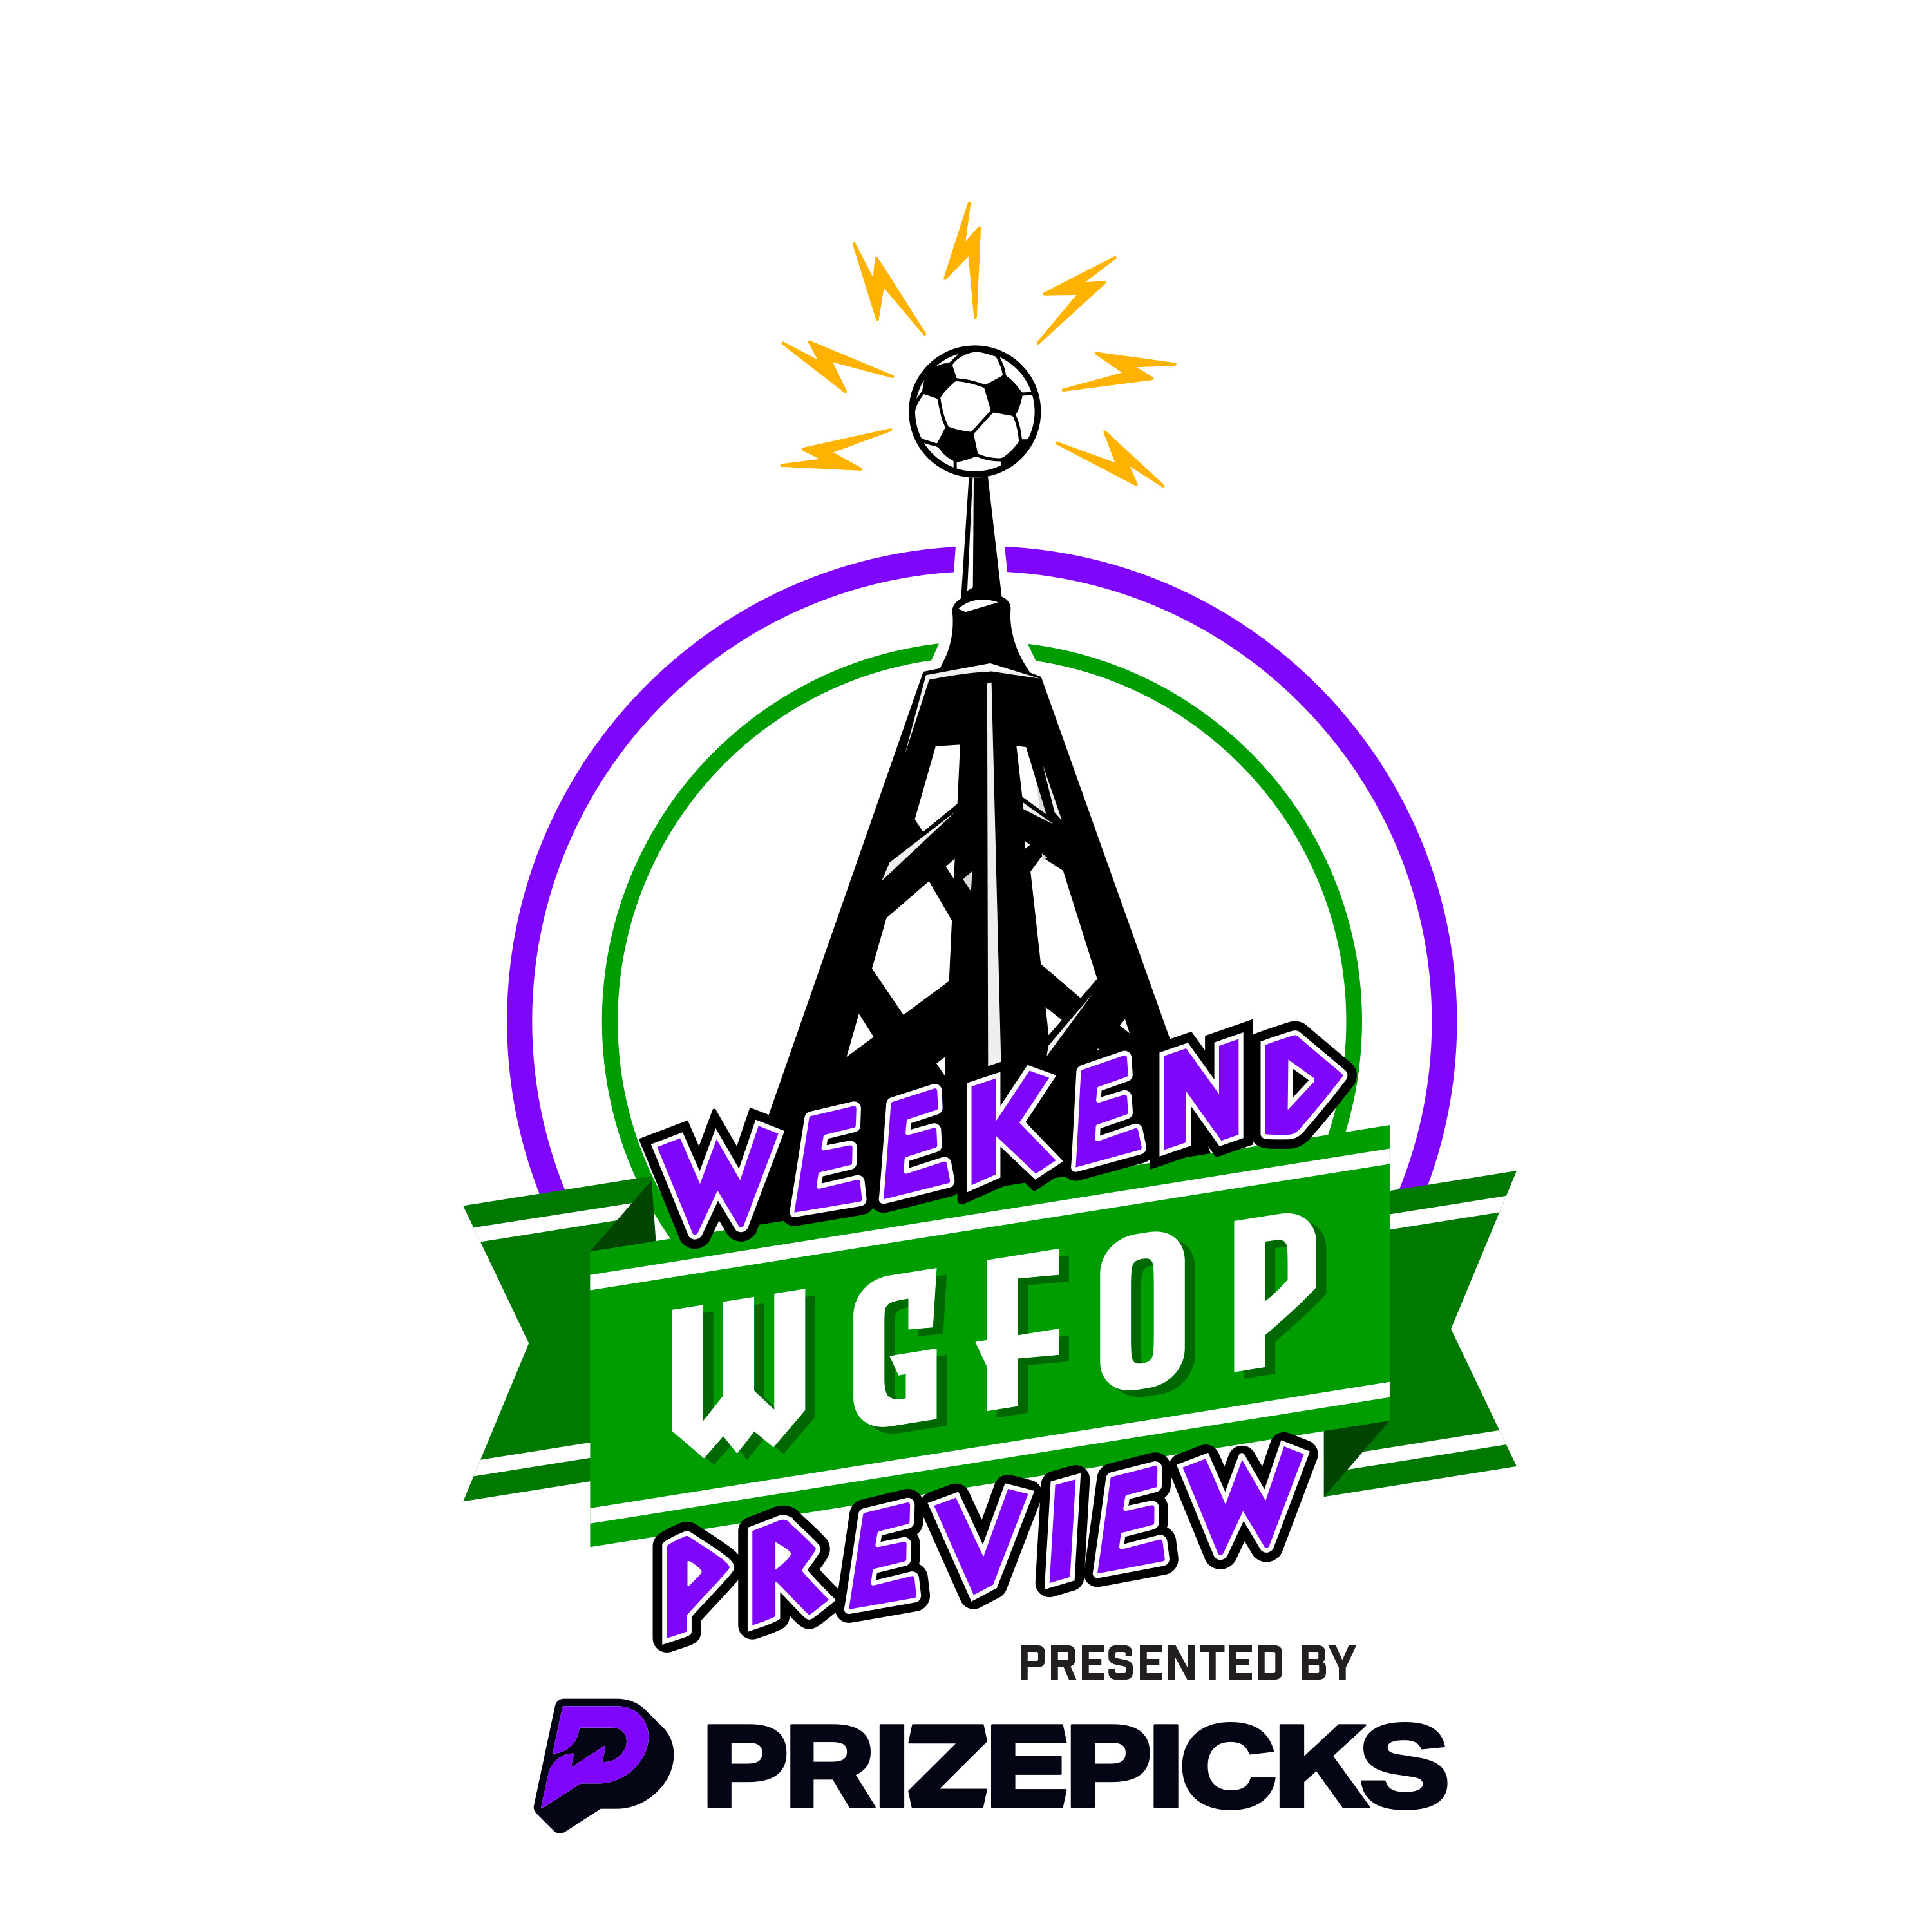 07/12/24: WGFOP Weekend Preview, Presented by PrizePicks